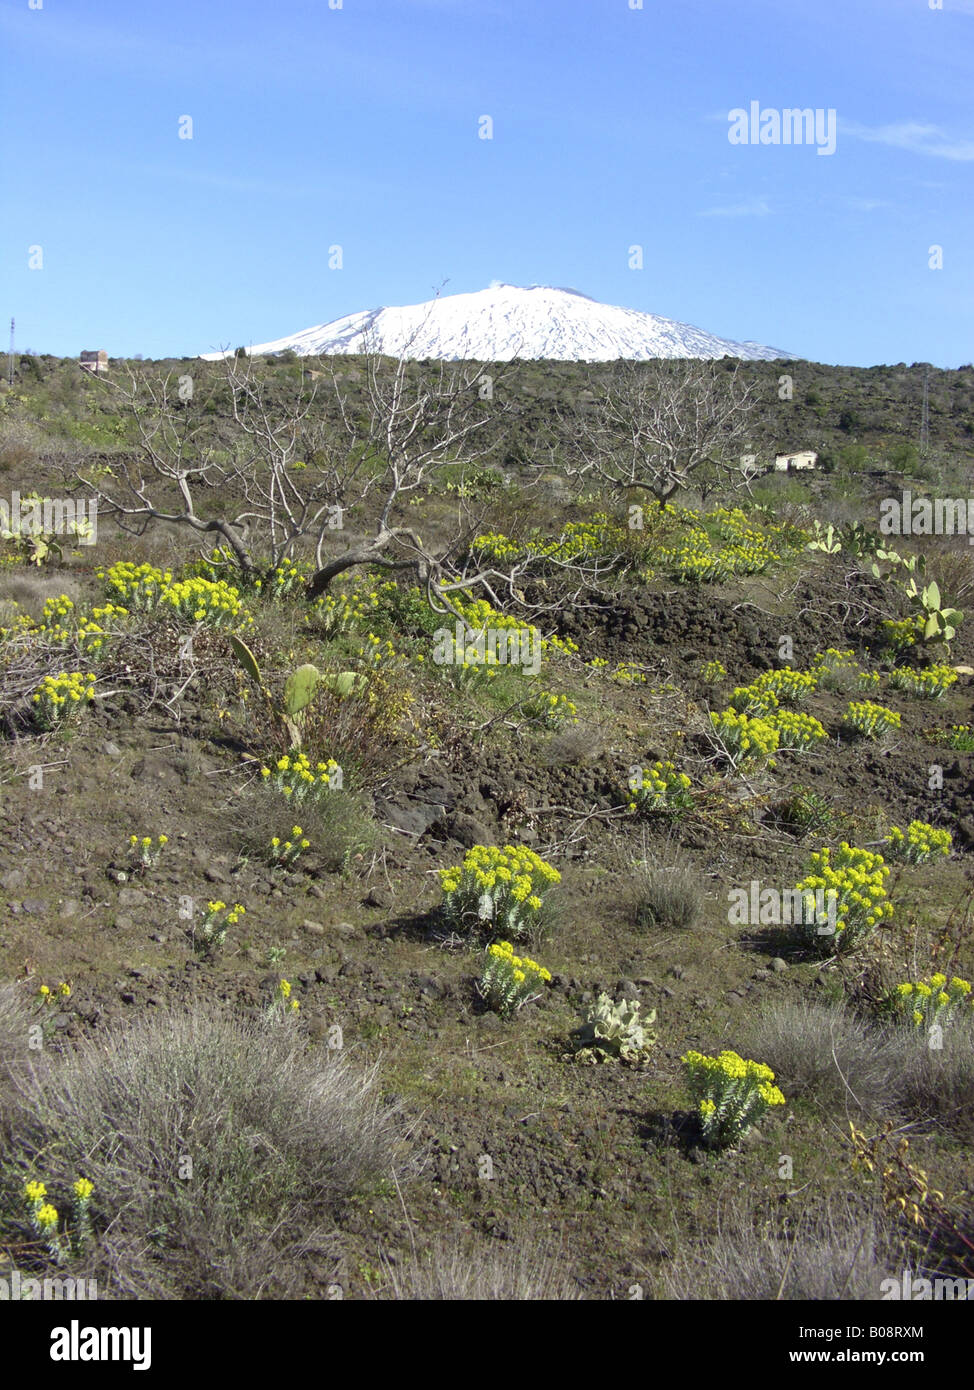 Silver Spurge, Upright Myrtle Spurge (Euphorbia rigida), blooming plants with the snow covered Mount Etna in the background, It Stock Photo